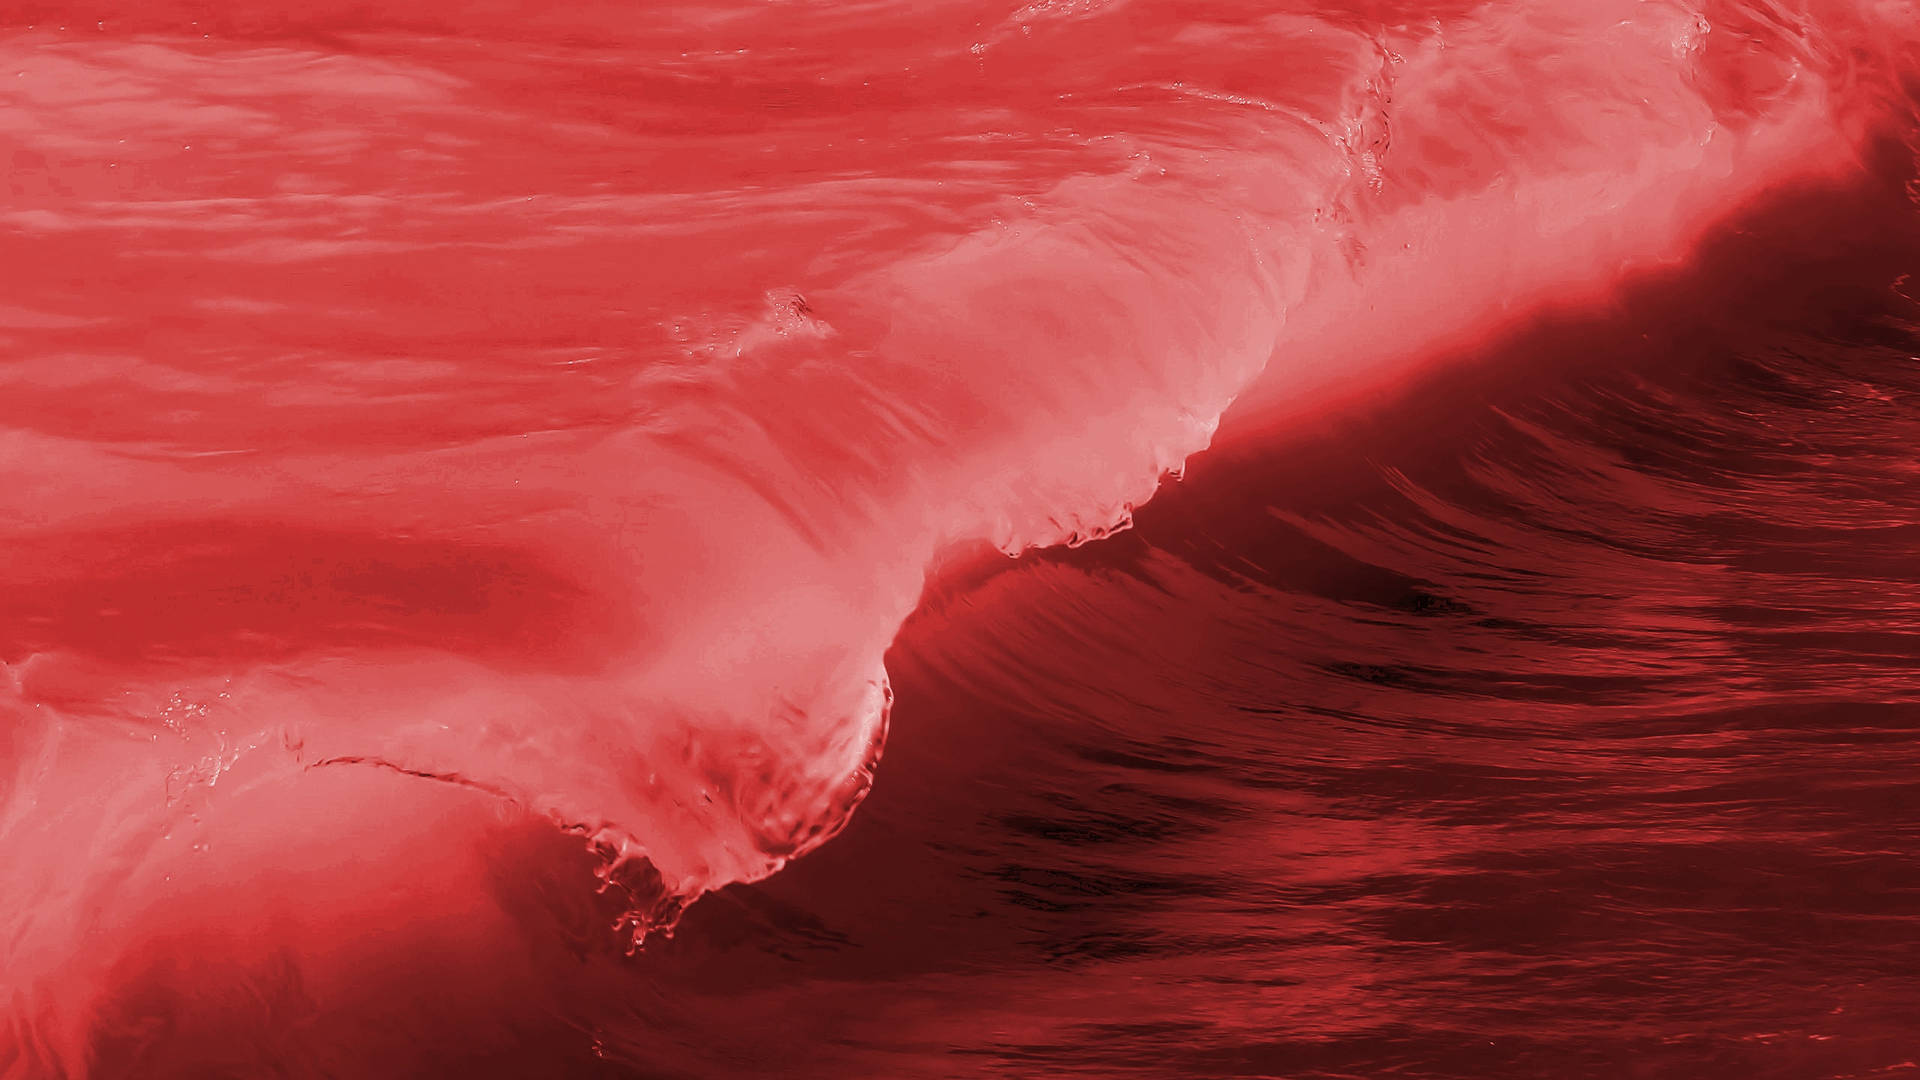 Aesthetic Beach Red Waves